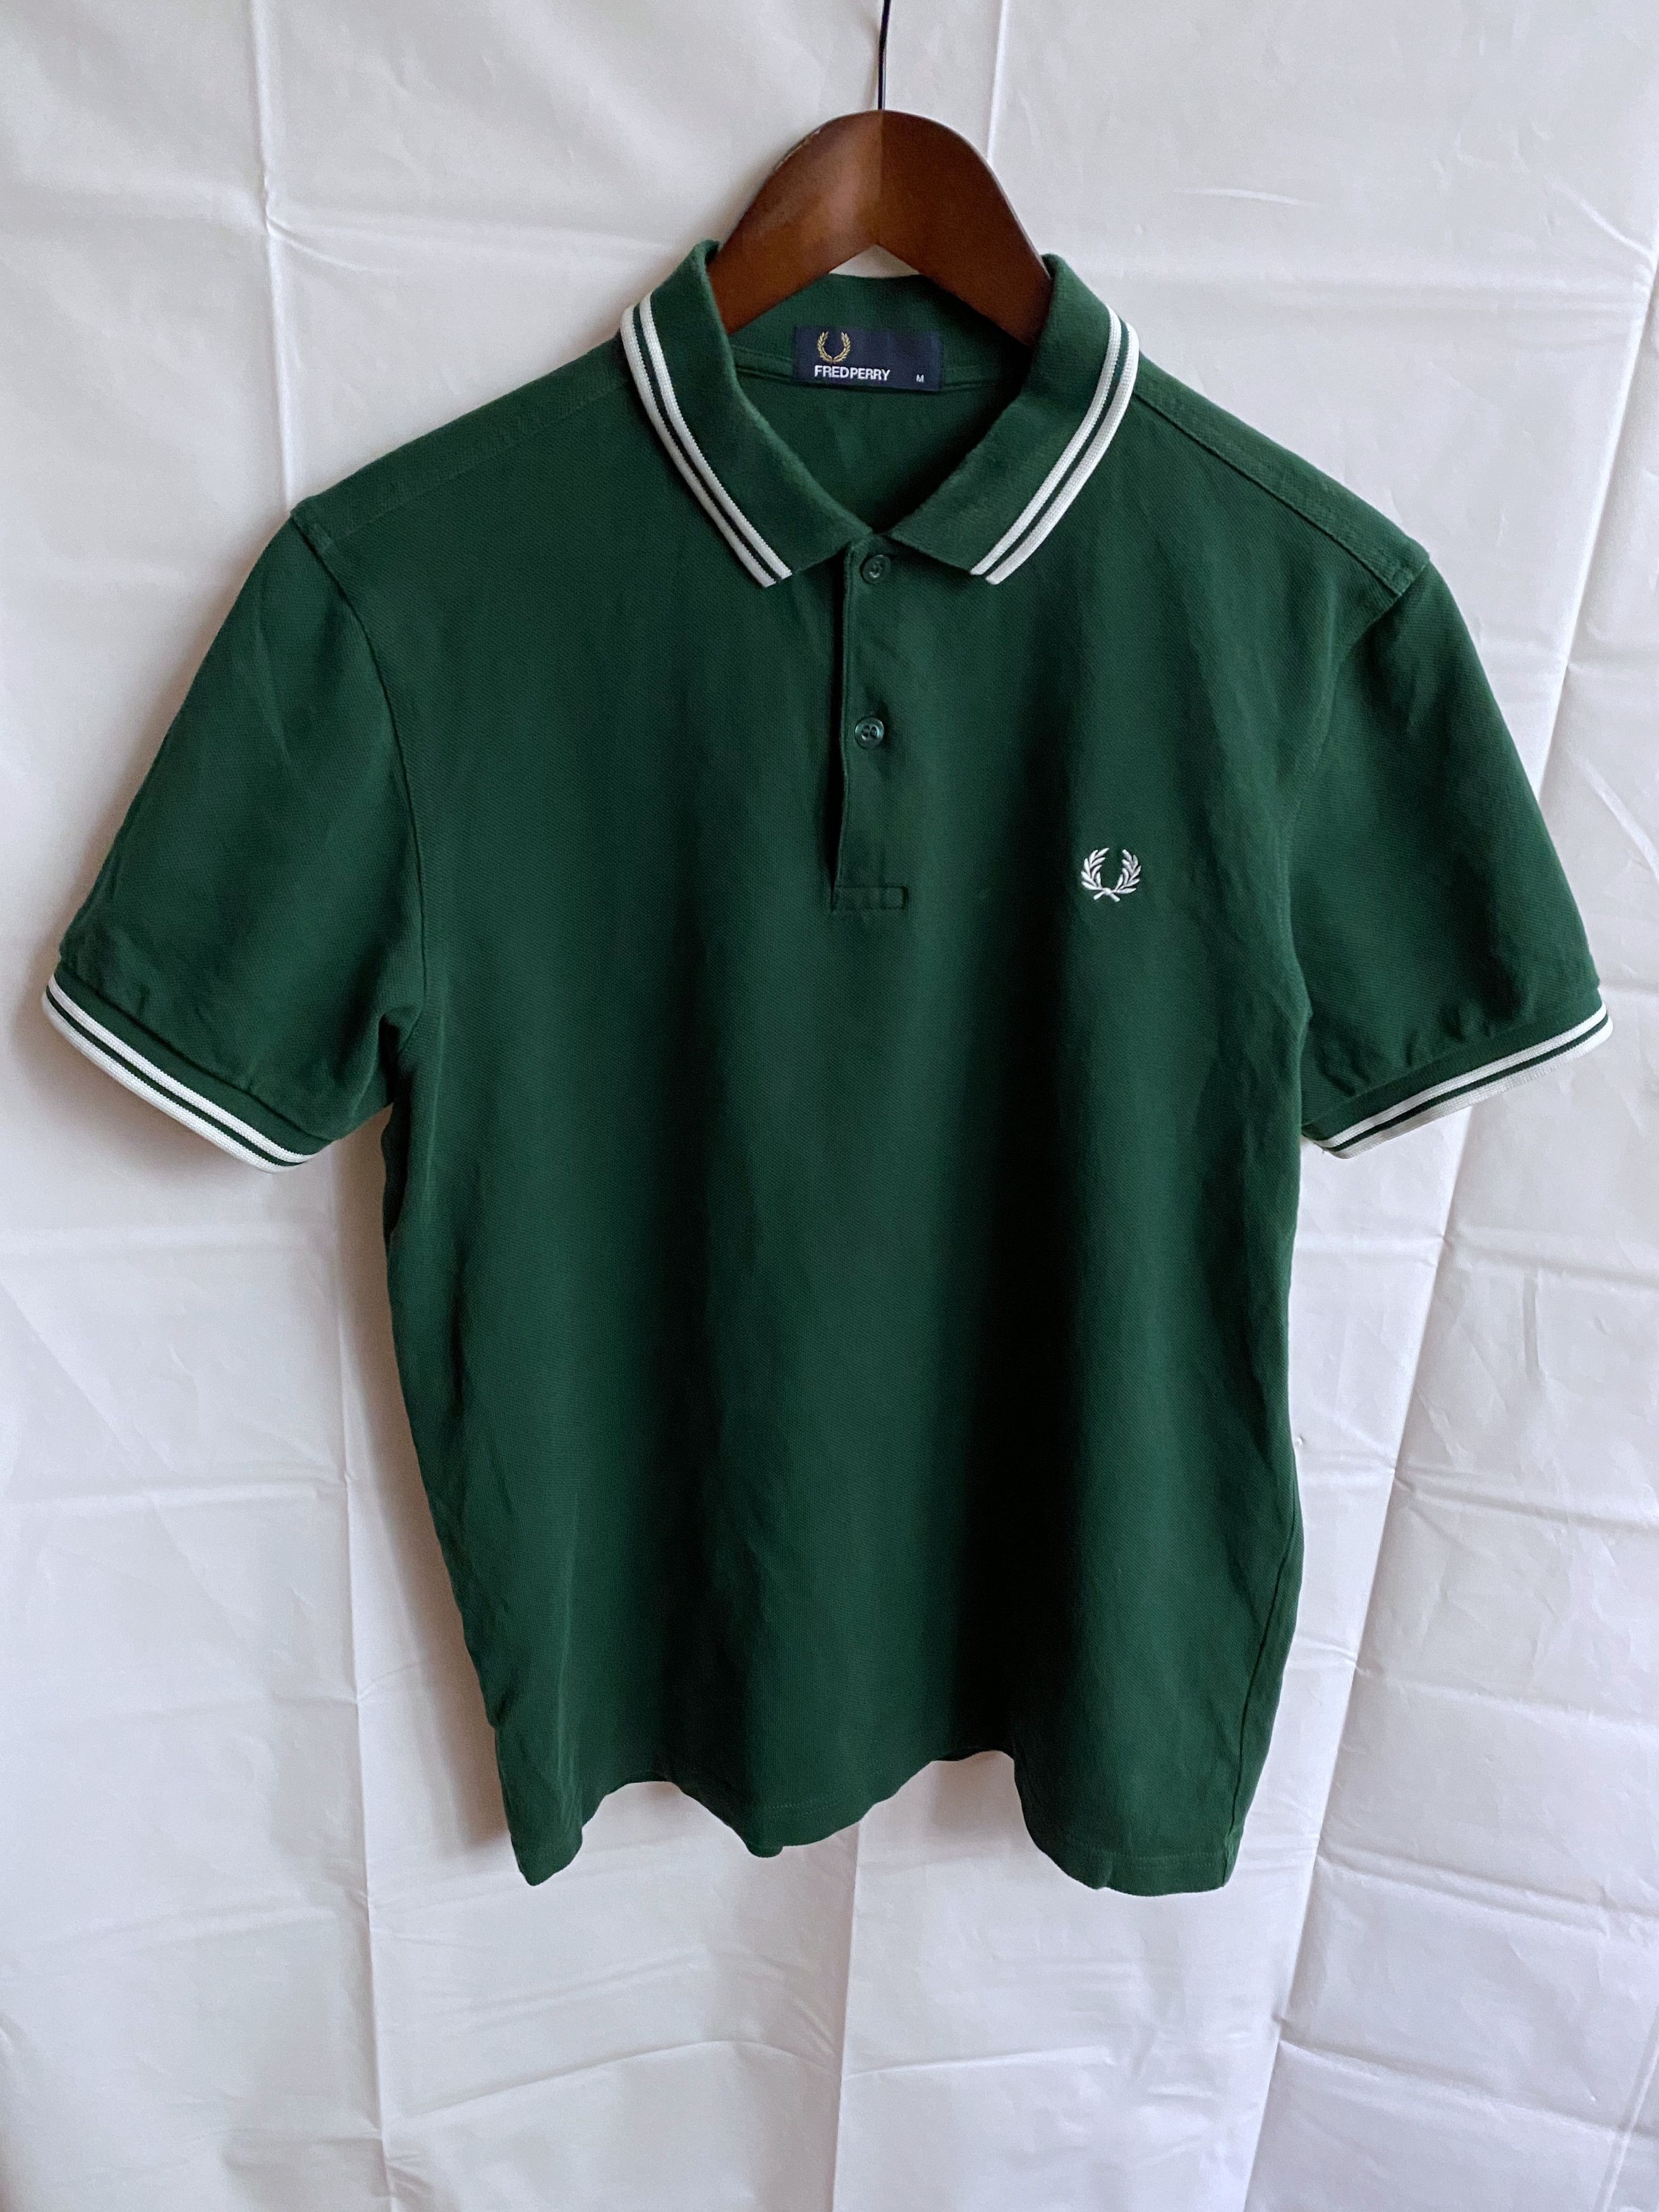 Fred Perry Fred Perry SKA Mod. polo shirt size USA TTS S | Grailed